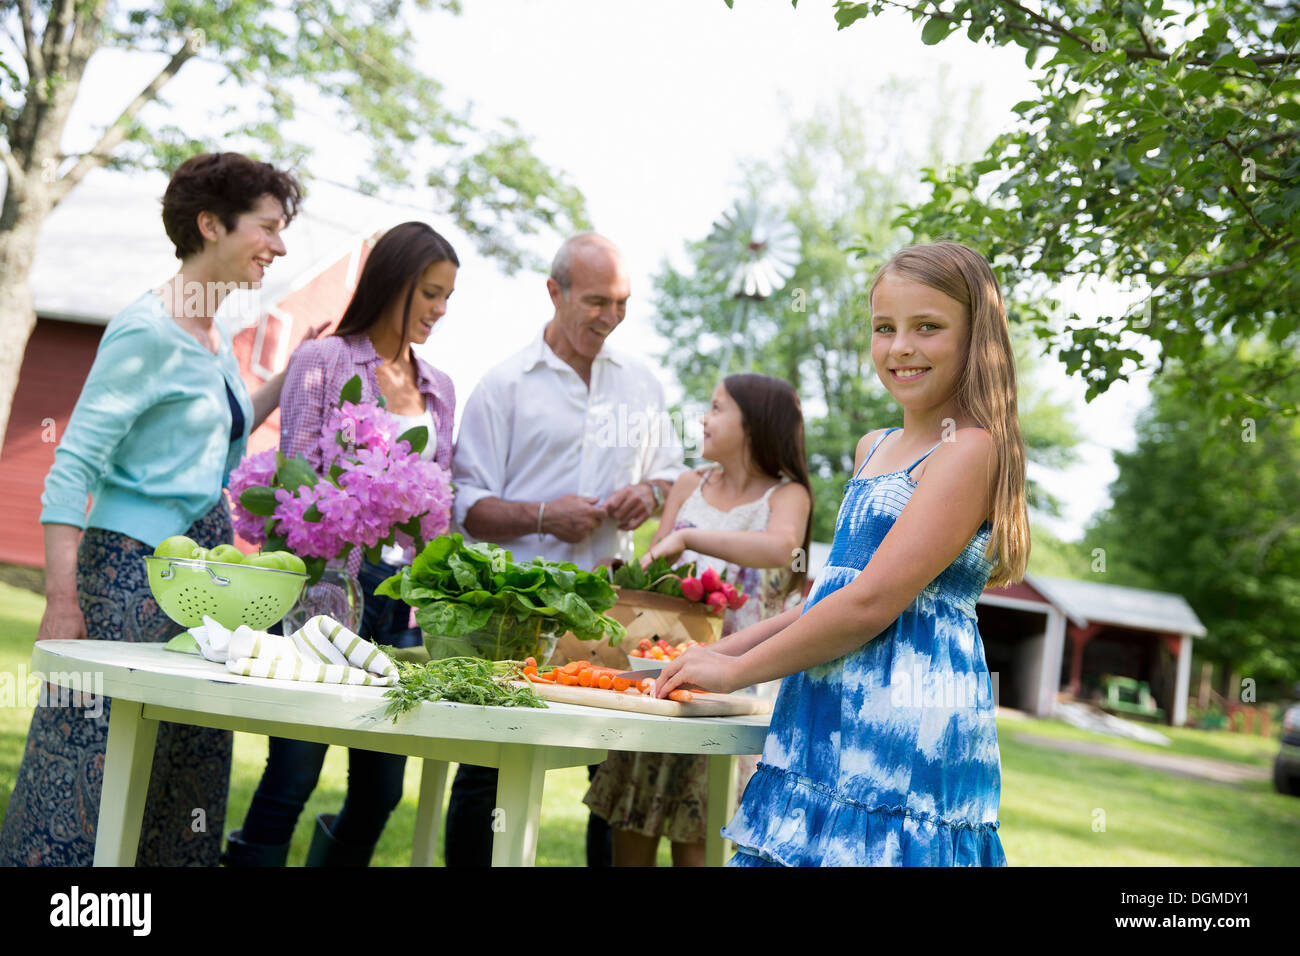 Family party table salads fresh fruits vegetables Parents children. Two girls, one young woman mature couple Stock Photo